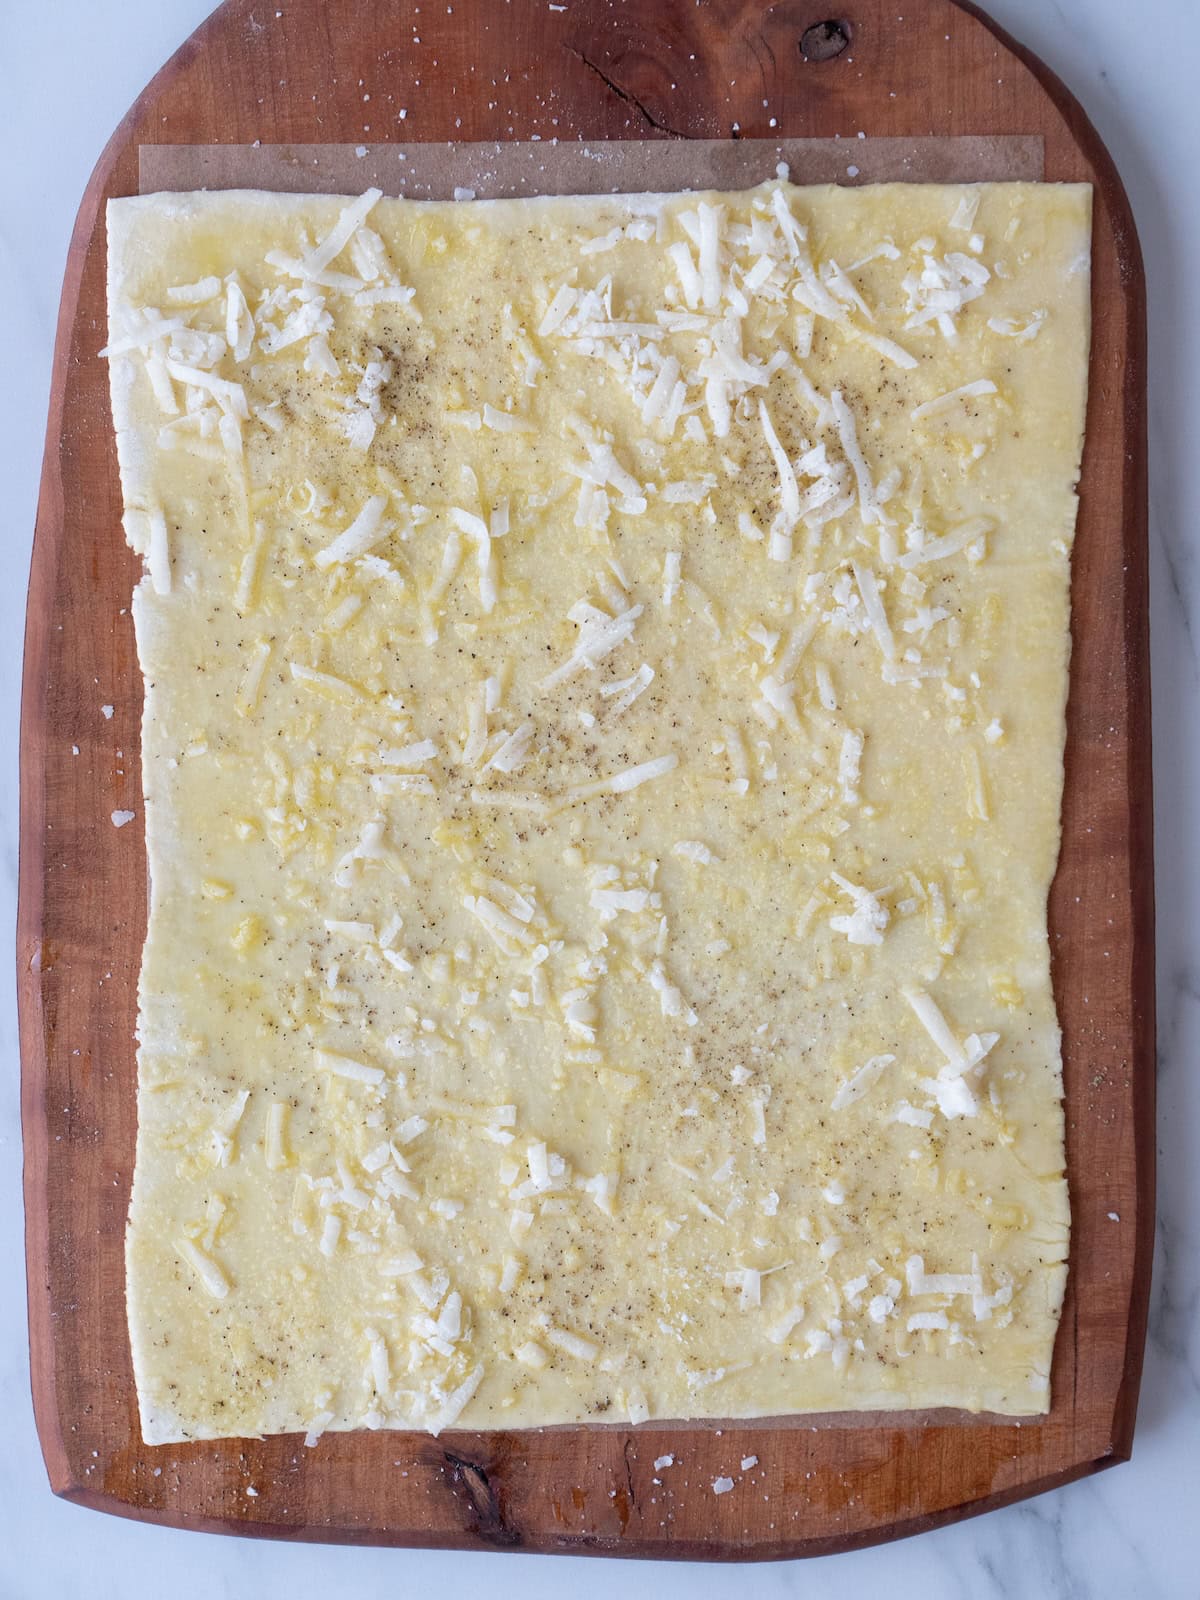 A puff pastry rolled out on a wooden board, brushed with olive oil and sprinkled with shredded cheese, salt and black pepper.